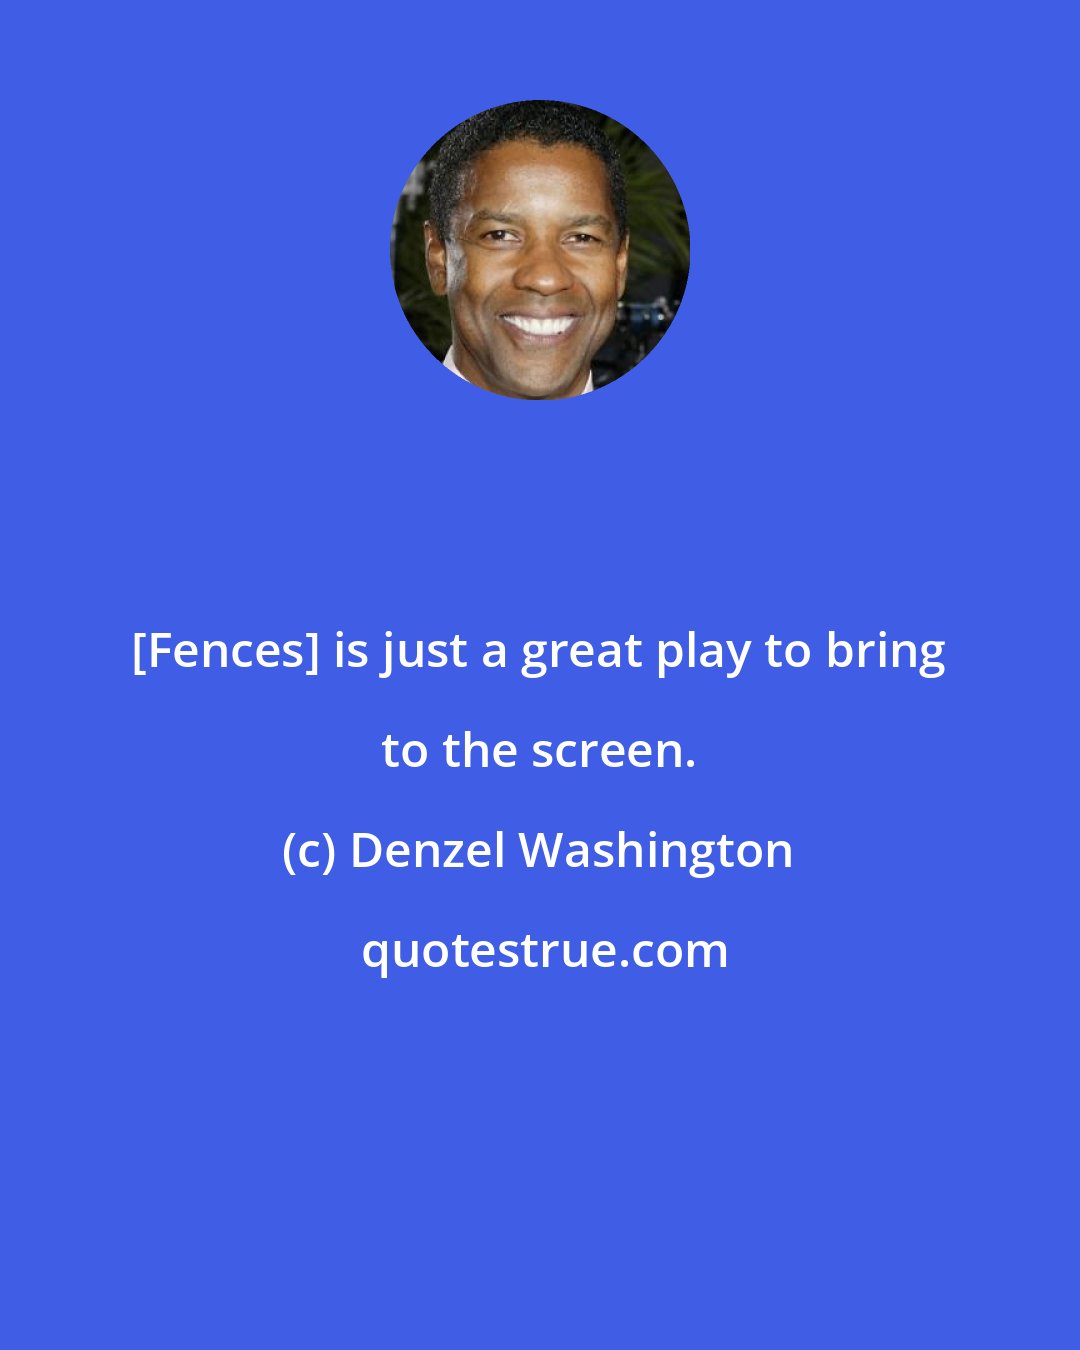 Denzel Washington: [Fences] is just a great play to bring to the screen.